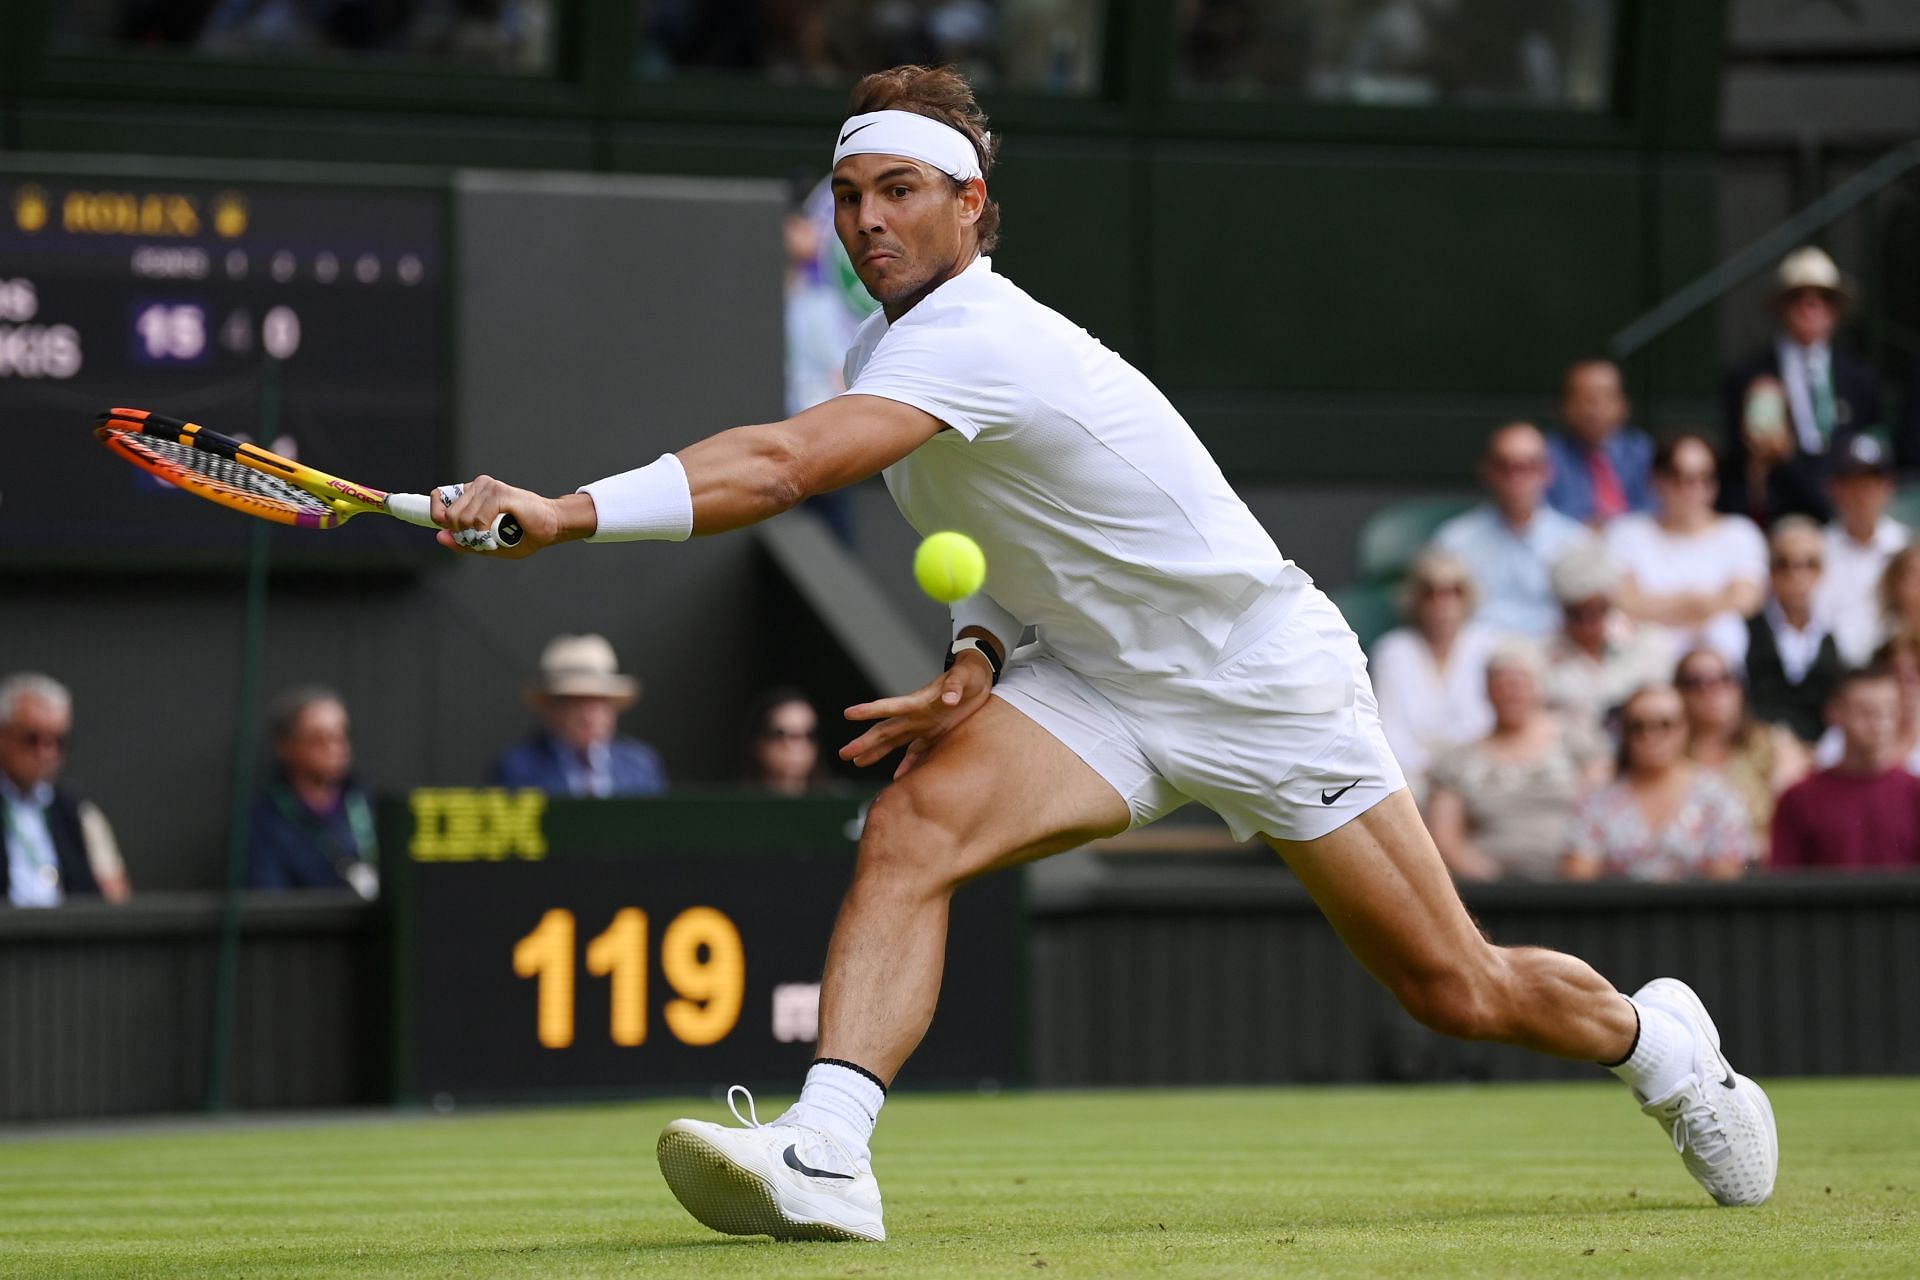 Rafael Nadal pictured at the 2022 Wimbledon Championships.